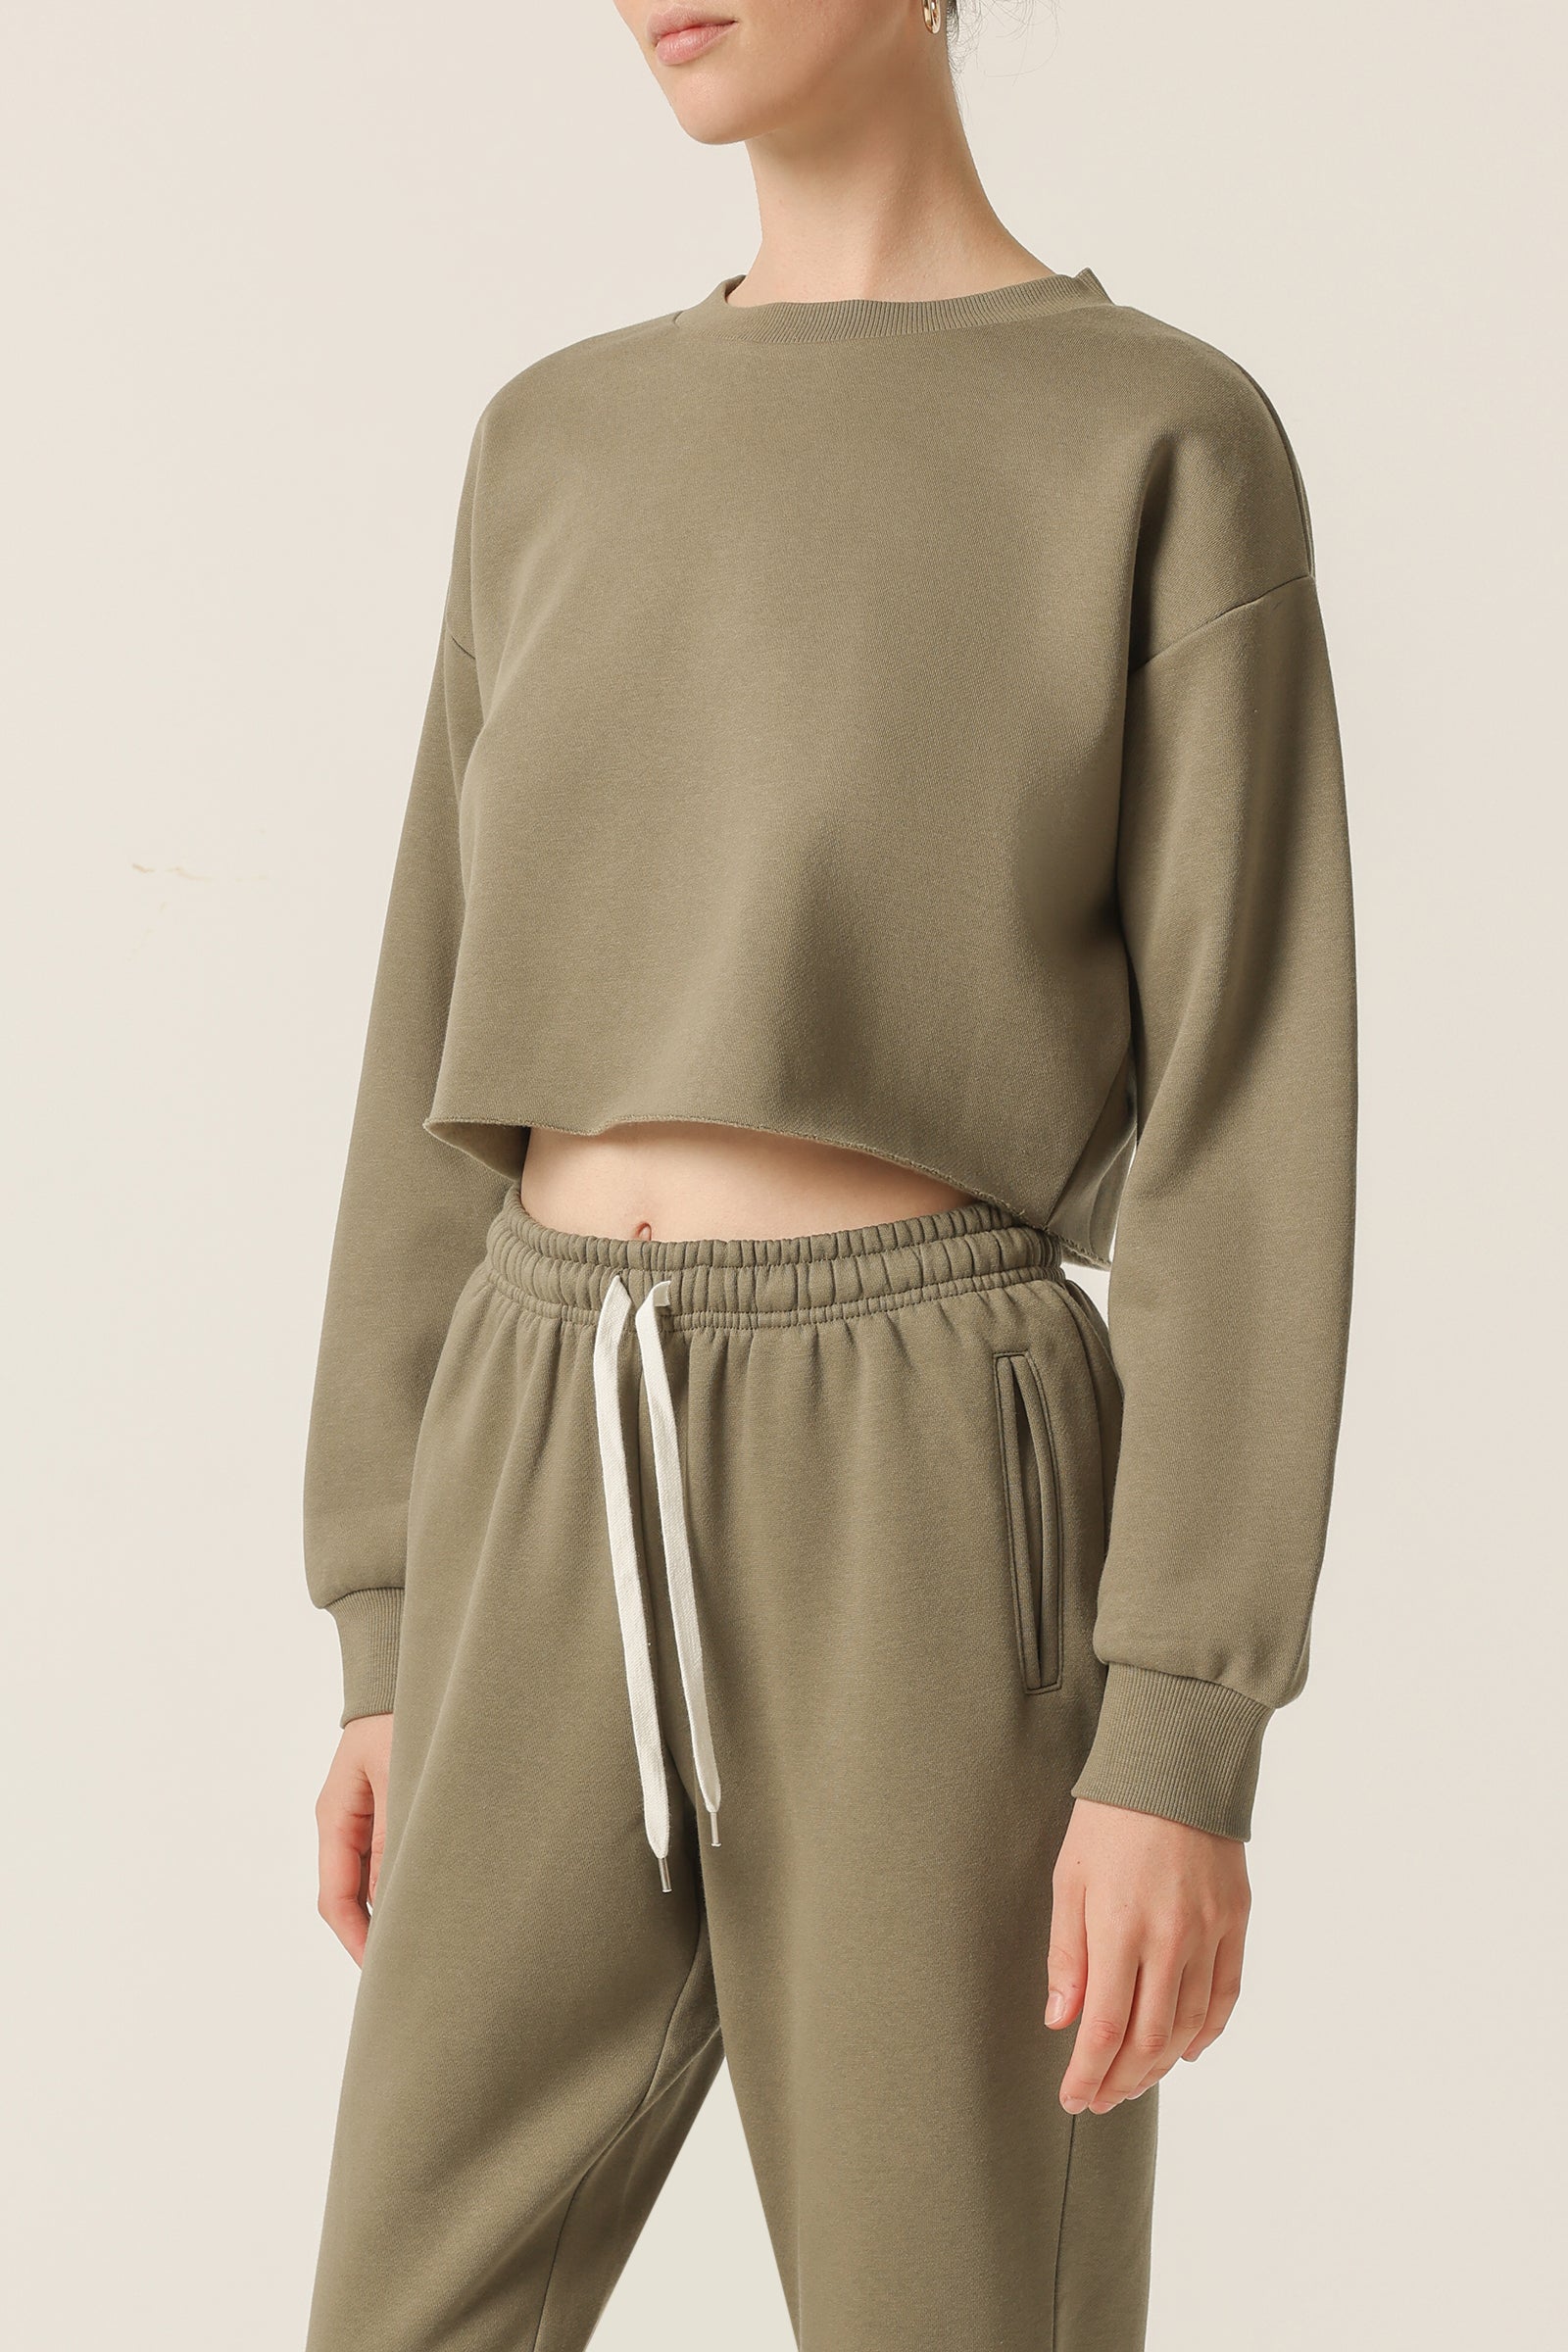 Nude Lucy Carter Classic Crop Sweat In a Green Willow Colour